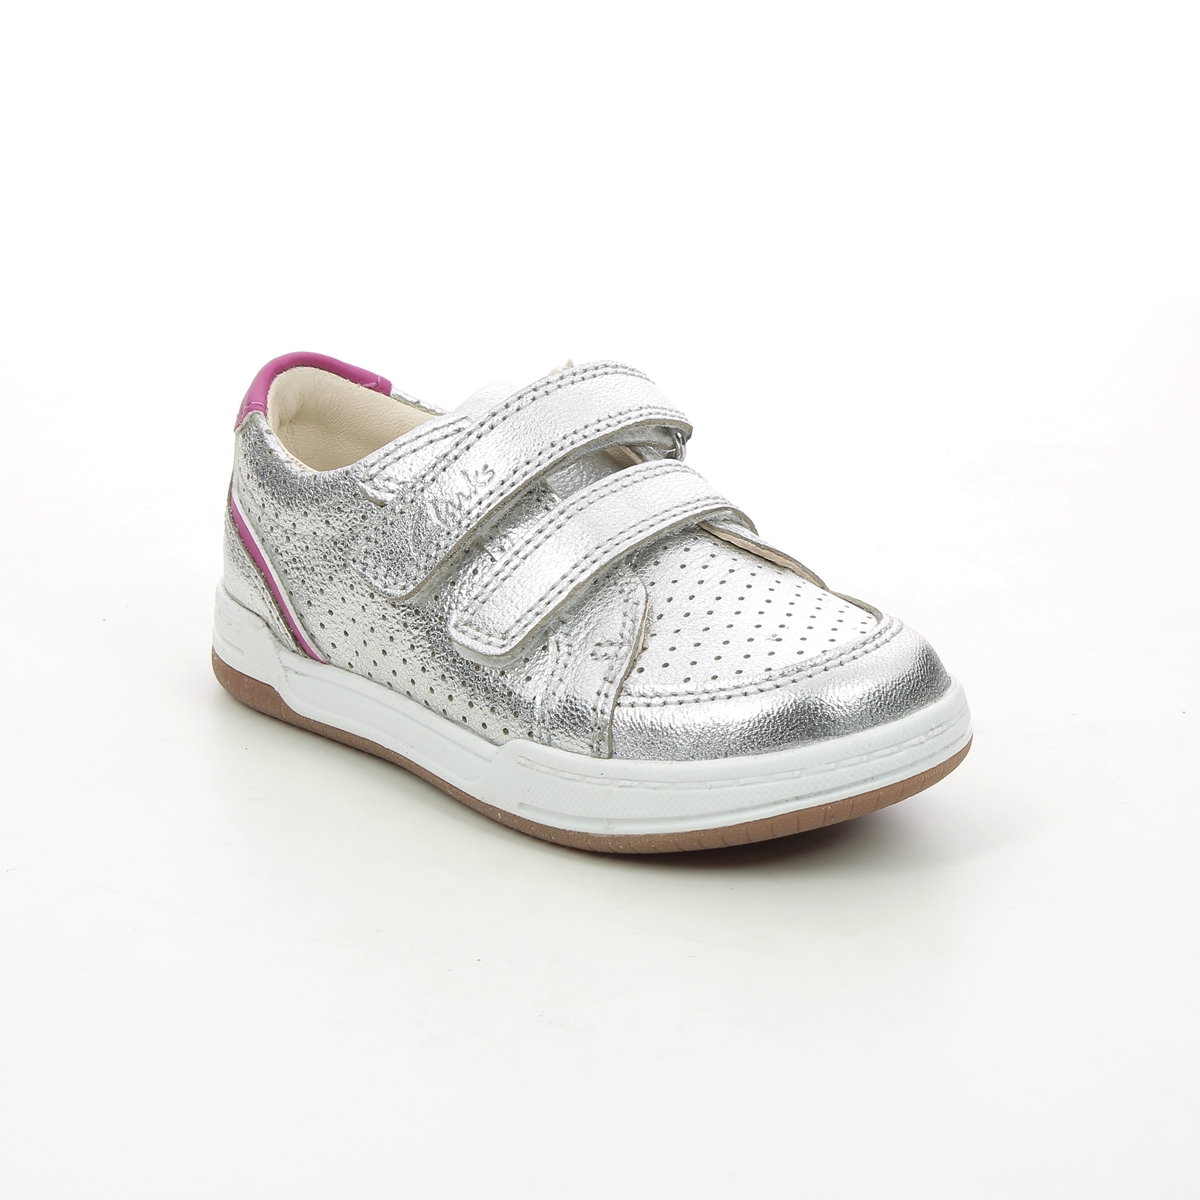 Clarks Fawn Solo T Silver Kids First And Toddler 624606F In Size 6 In Plain Silver F Width Fitting Regular Fit For kids